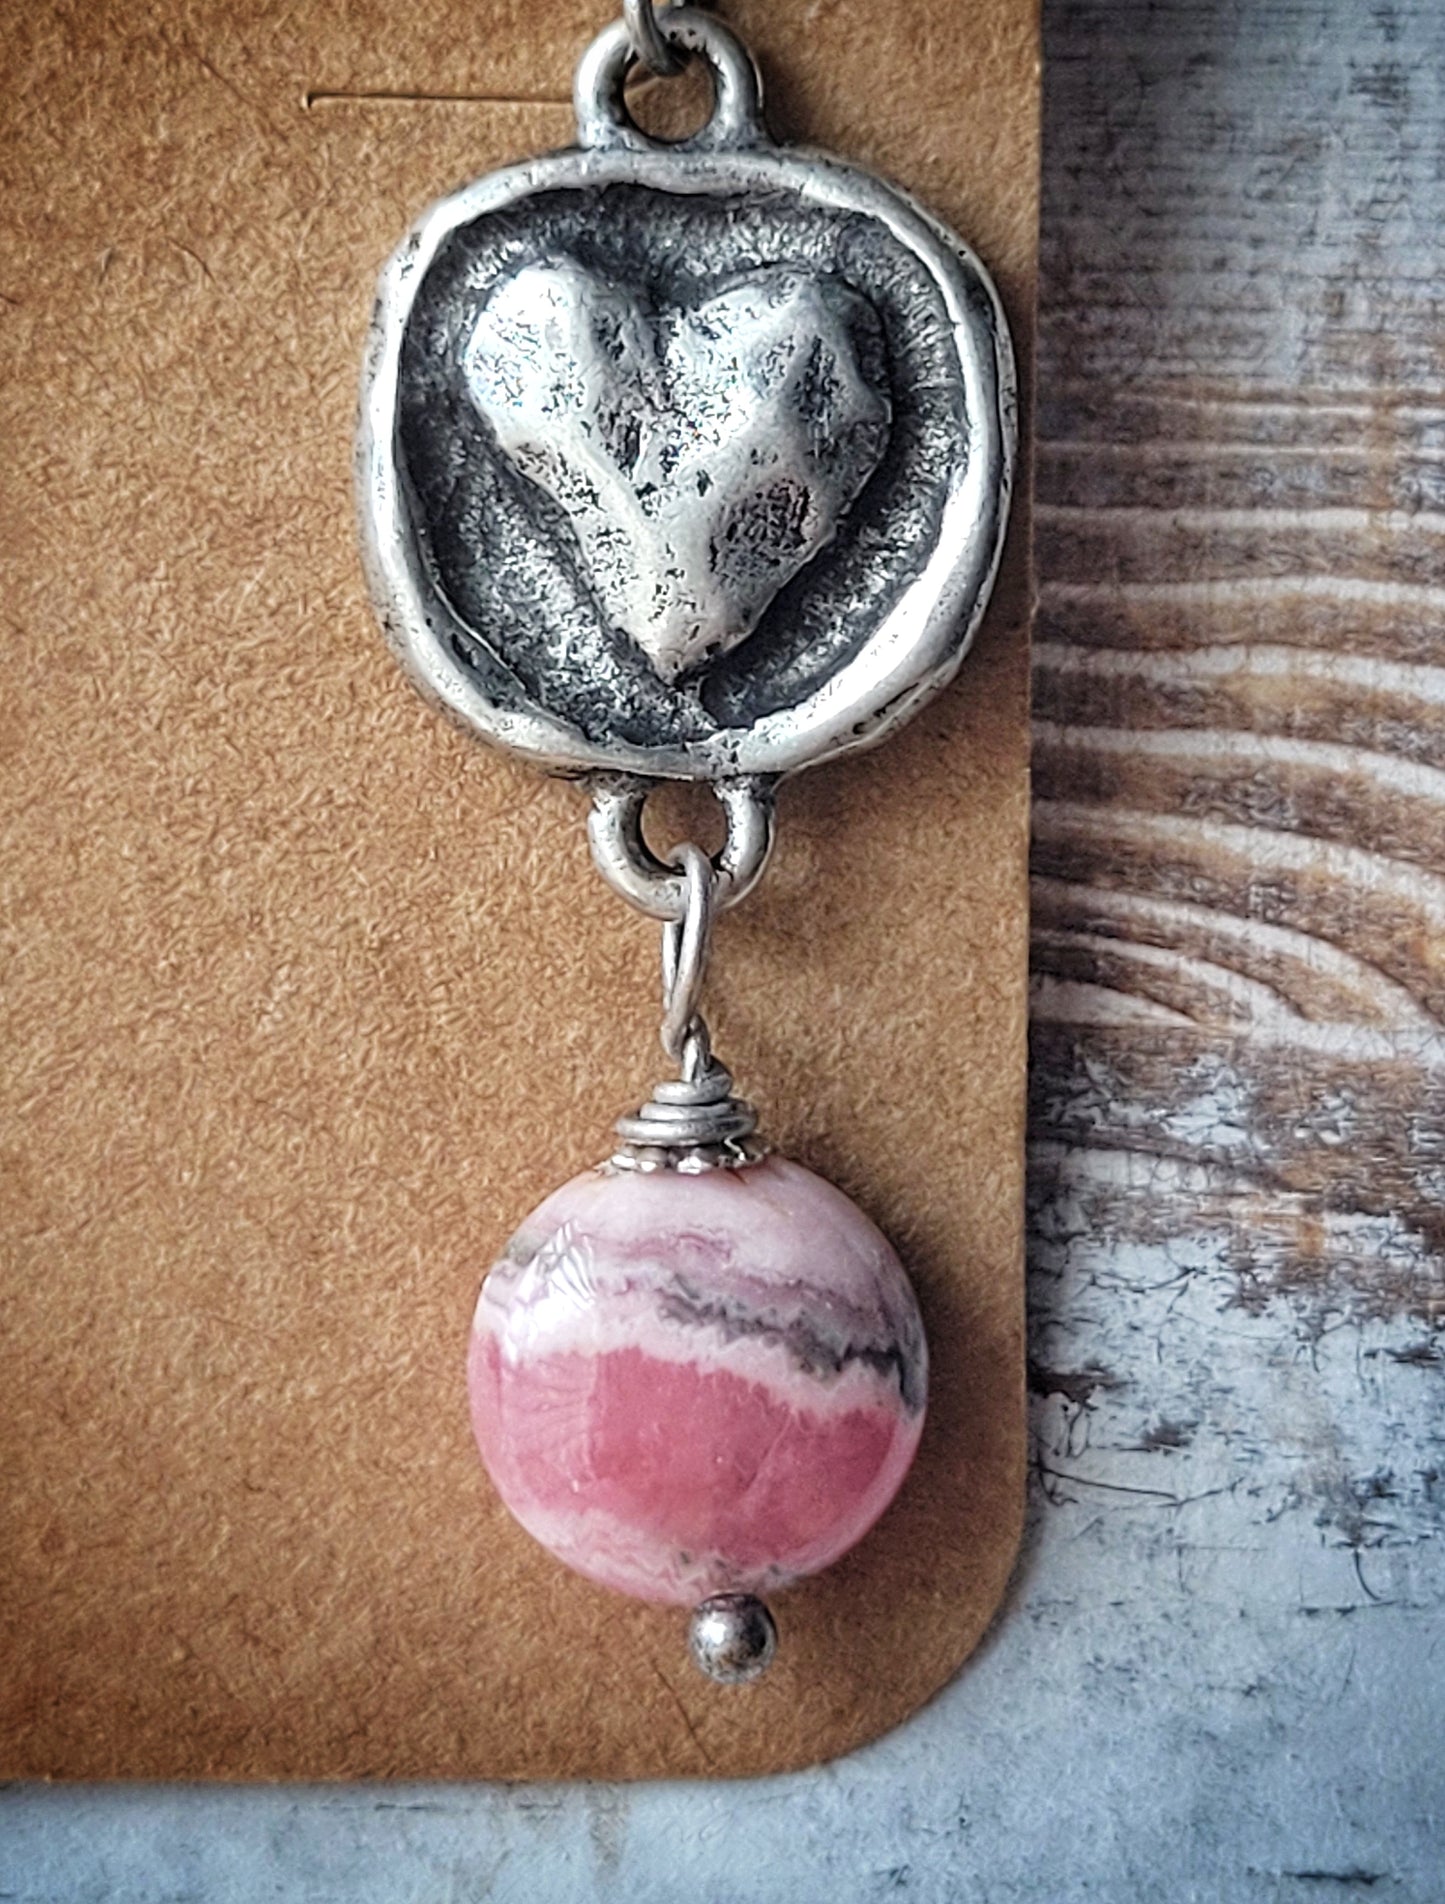 HEARTS and RHODOCROSITE EARRINGS, silver-plated pewter hammered heart and Rhodochrosite gemstone earrings